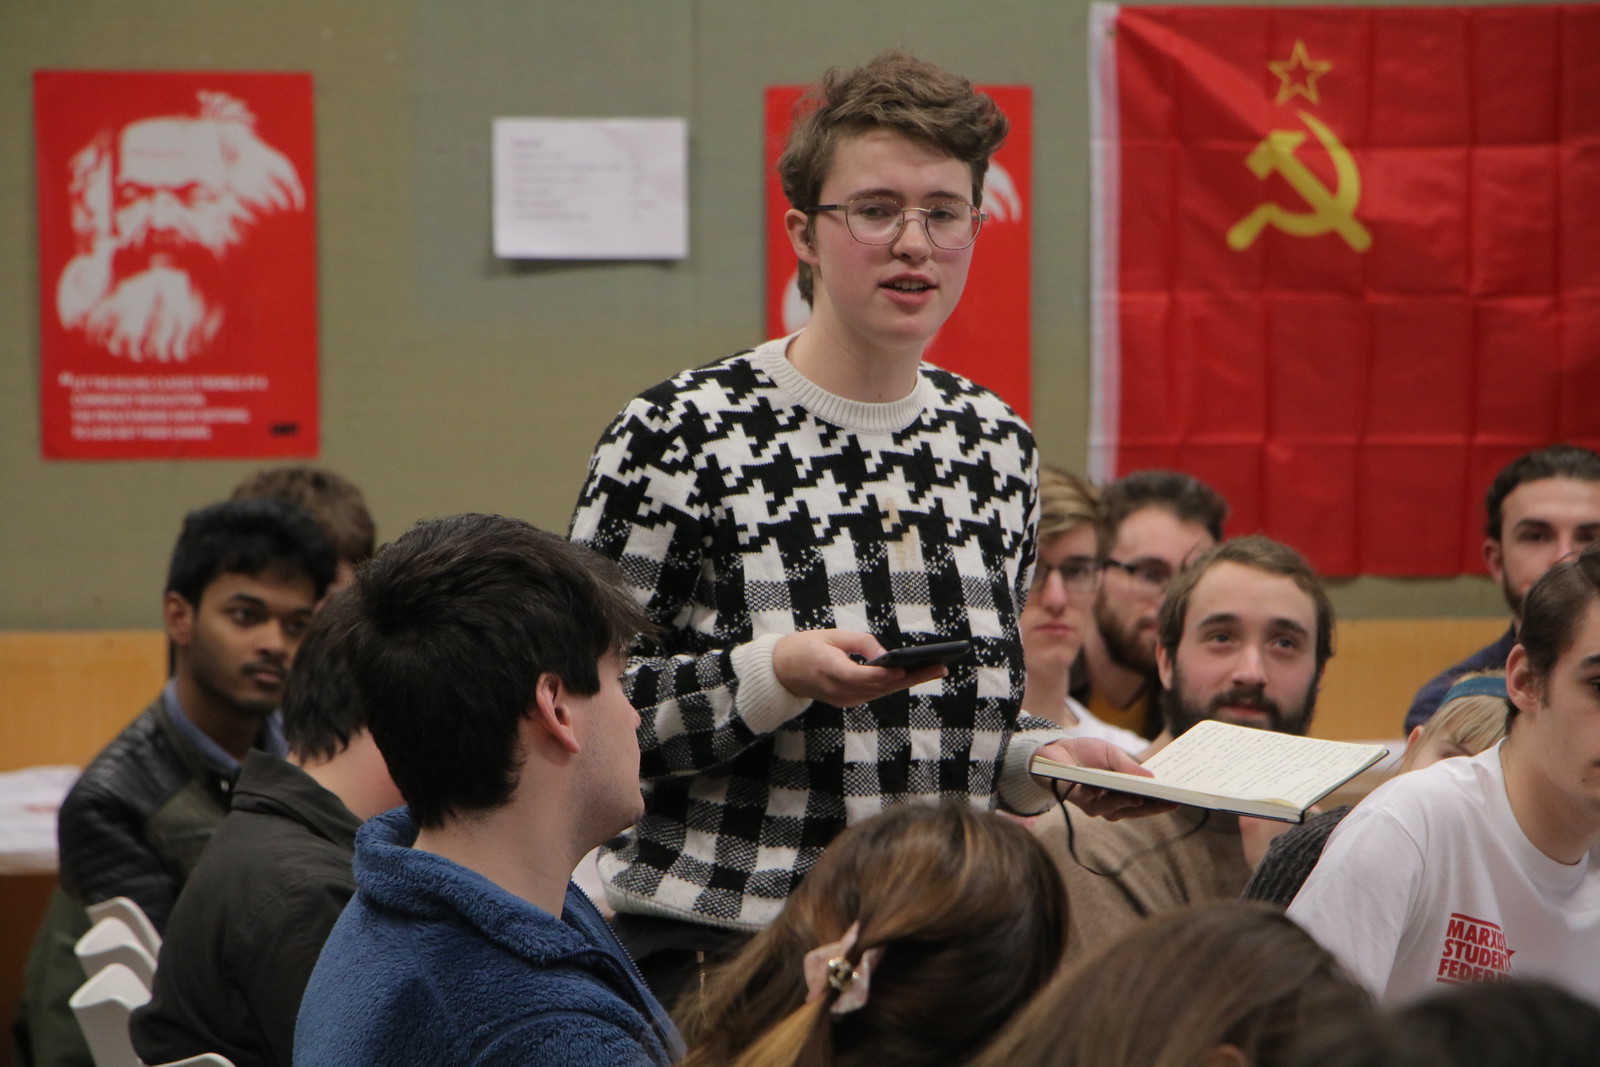 Marxist Student Federation conference 2019